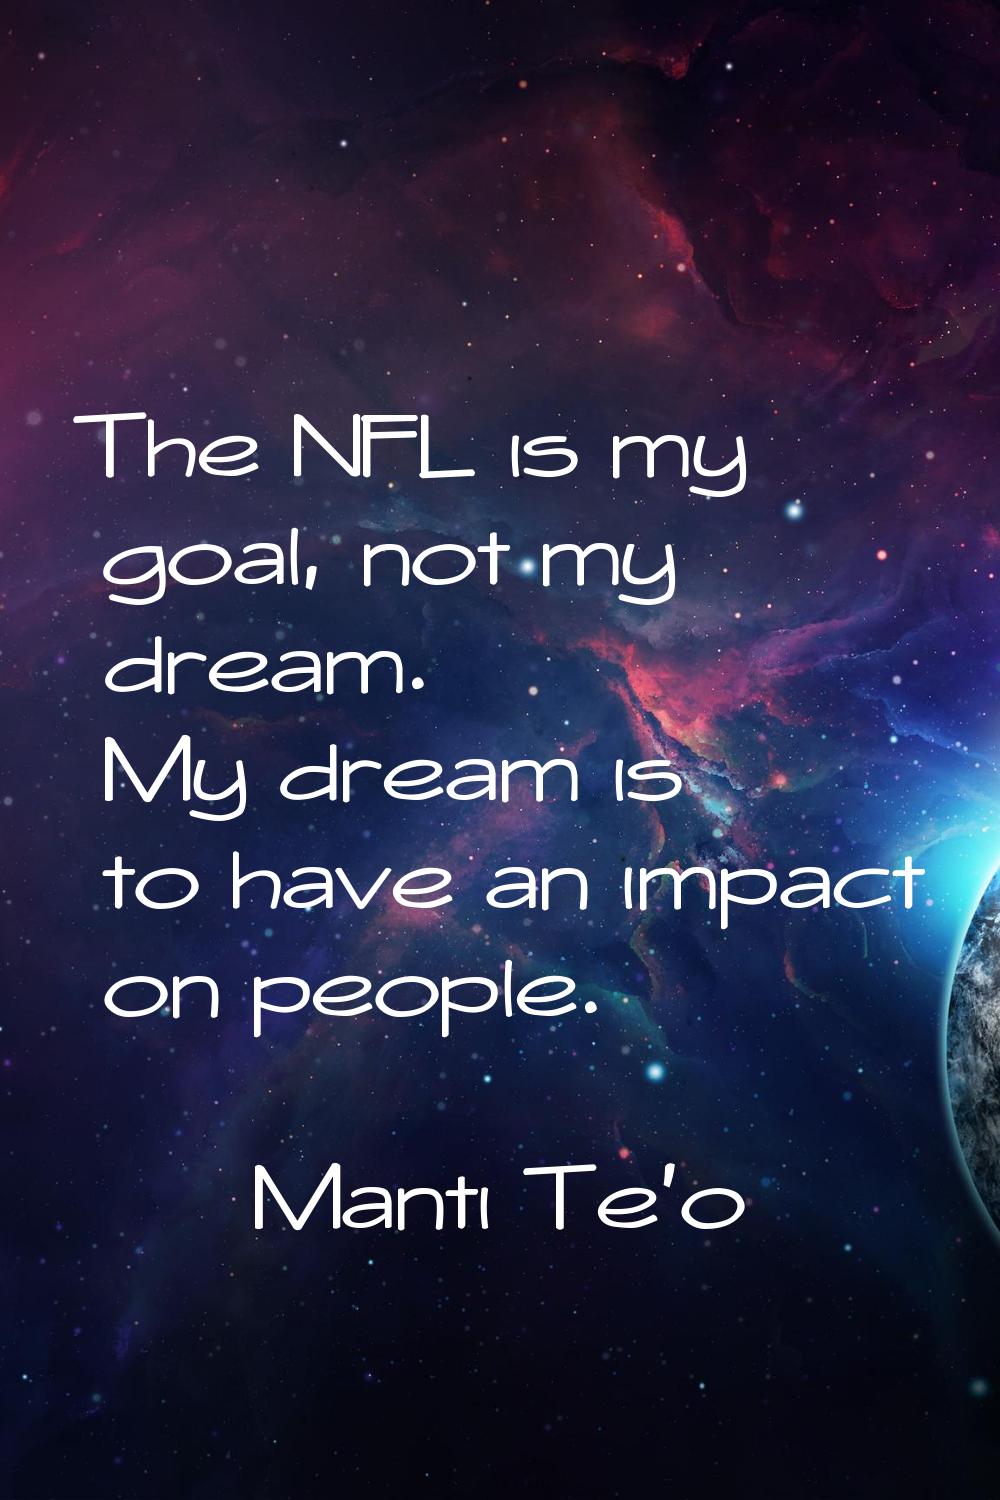 The NFL is my goal, not my dream. My dream is to have an impact on people.